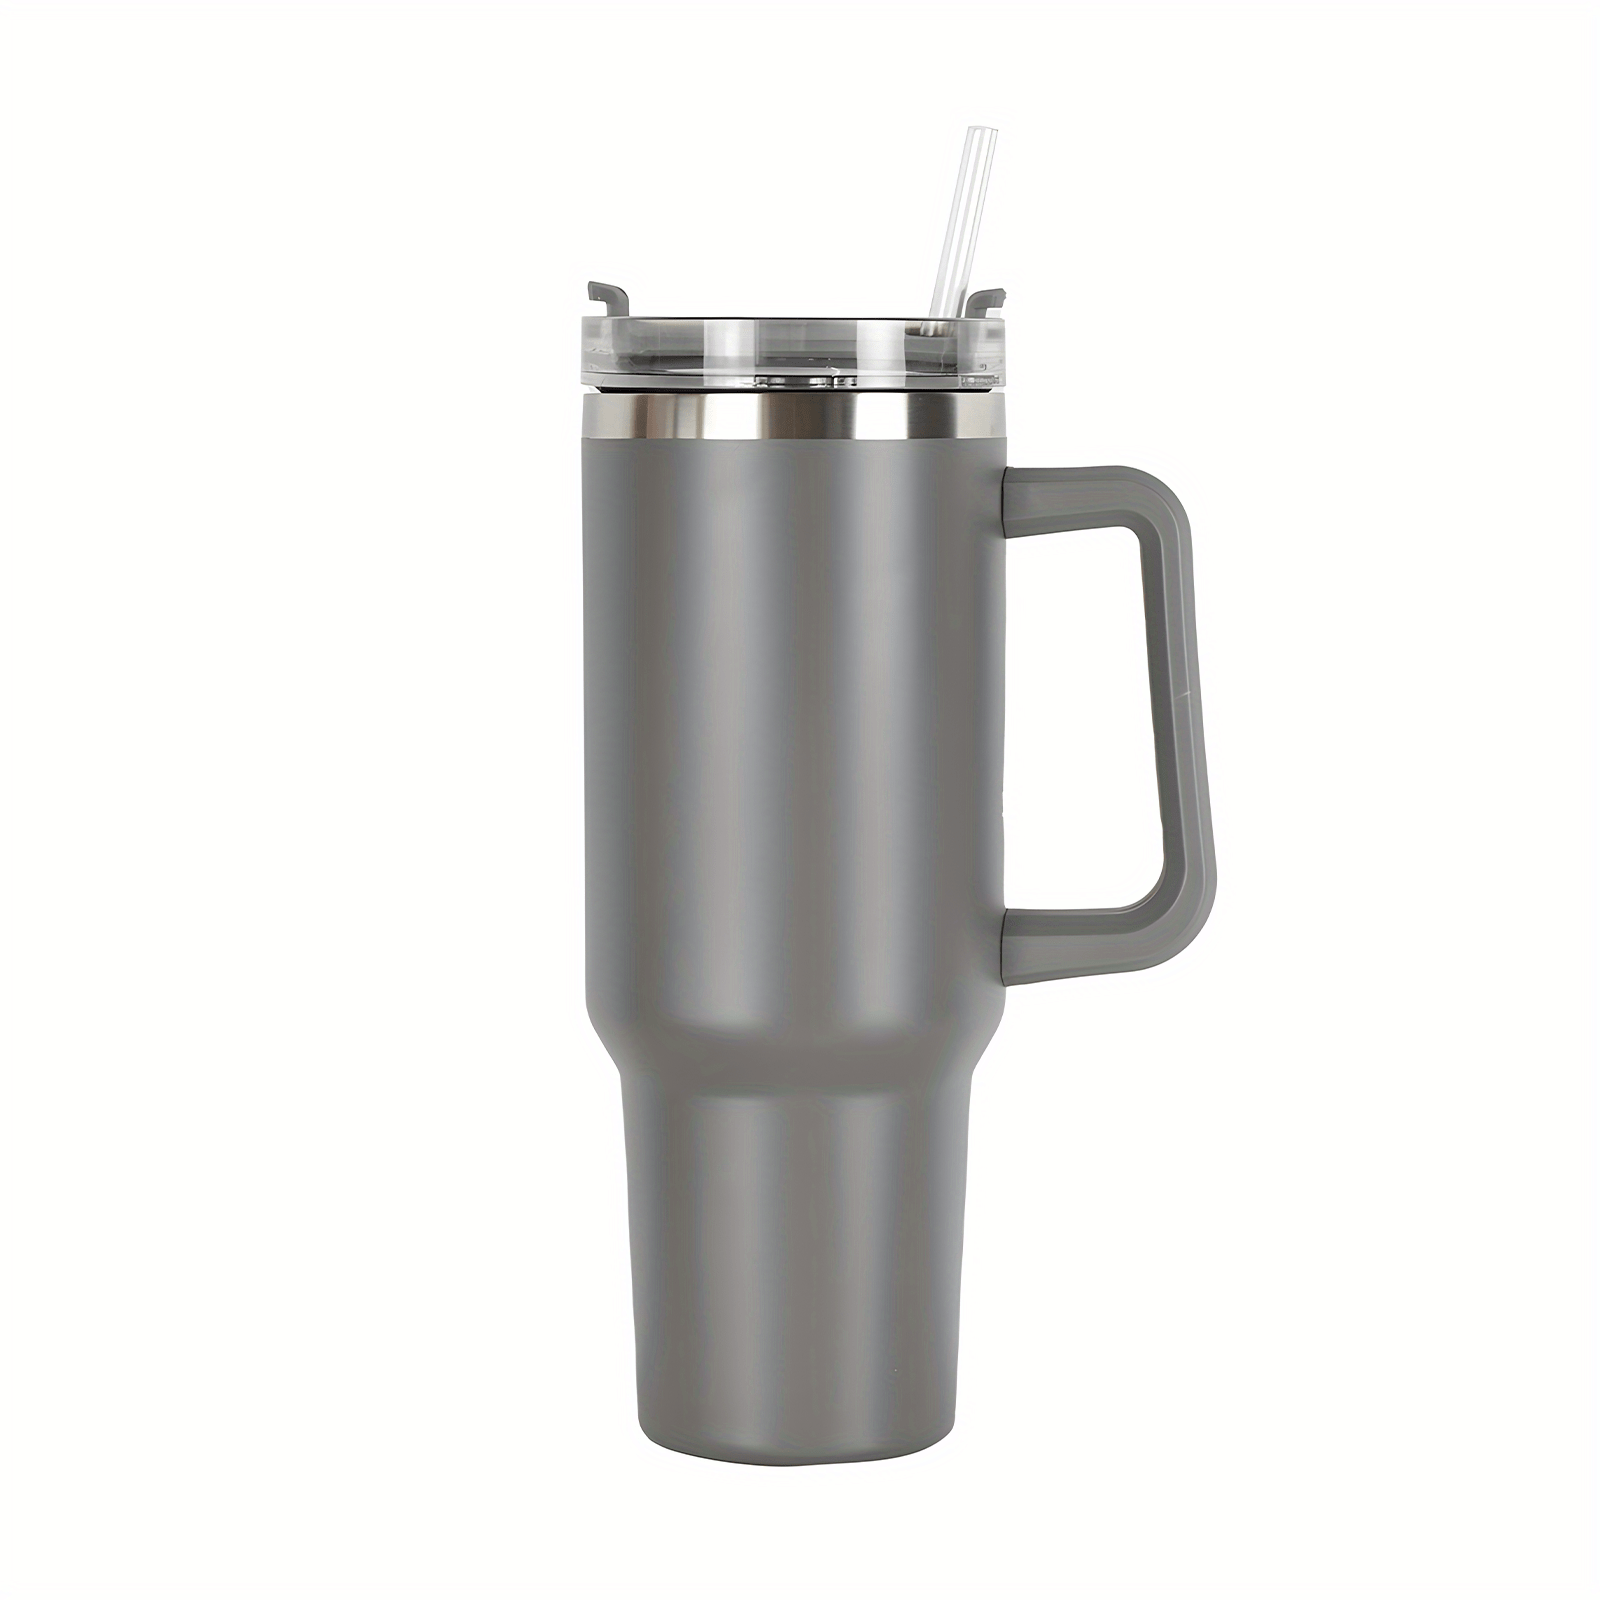 Car Tumbler Cup Tumbler with Handle 40oz Leak Resistant Lid Sealed Stainless Steel Cup Water Bottle for Water Hot and Cold Light Grey, Size